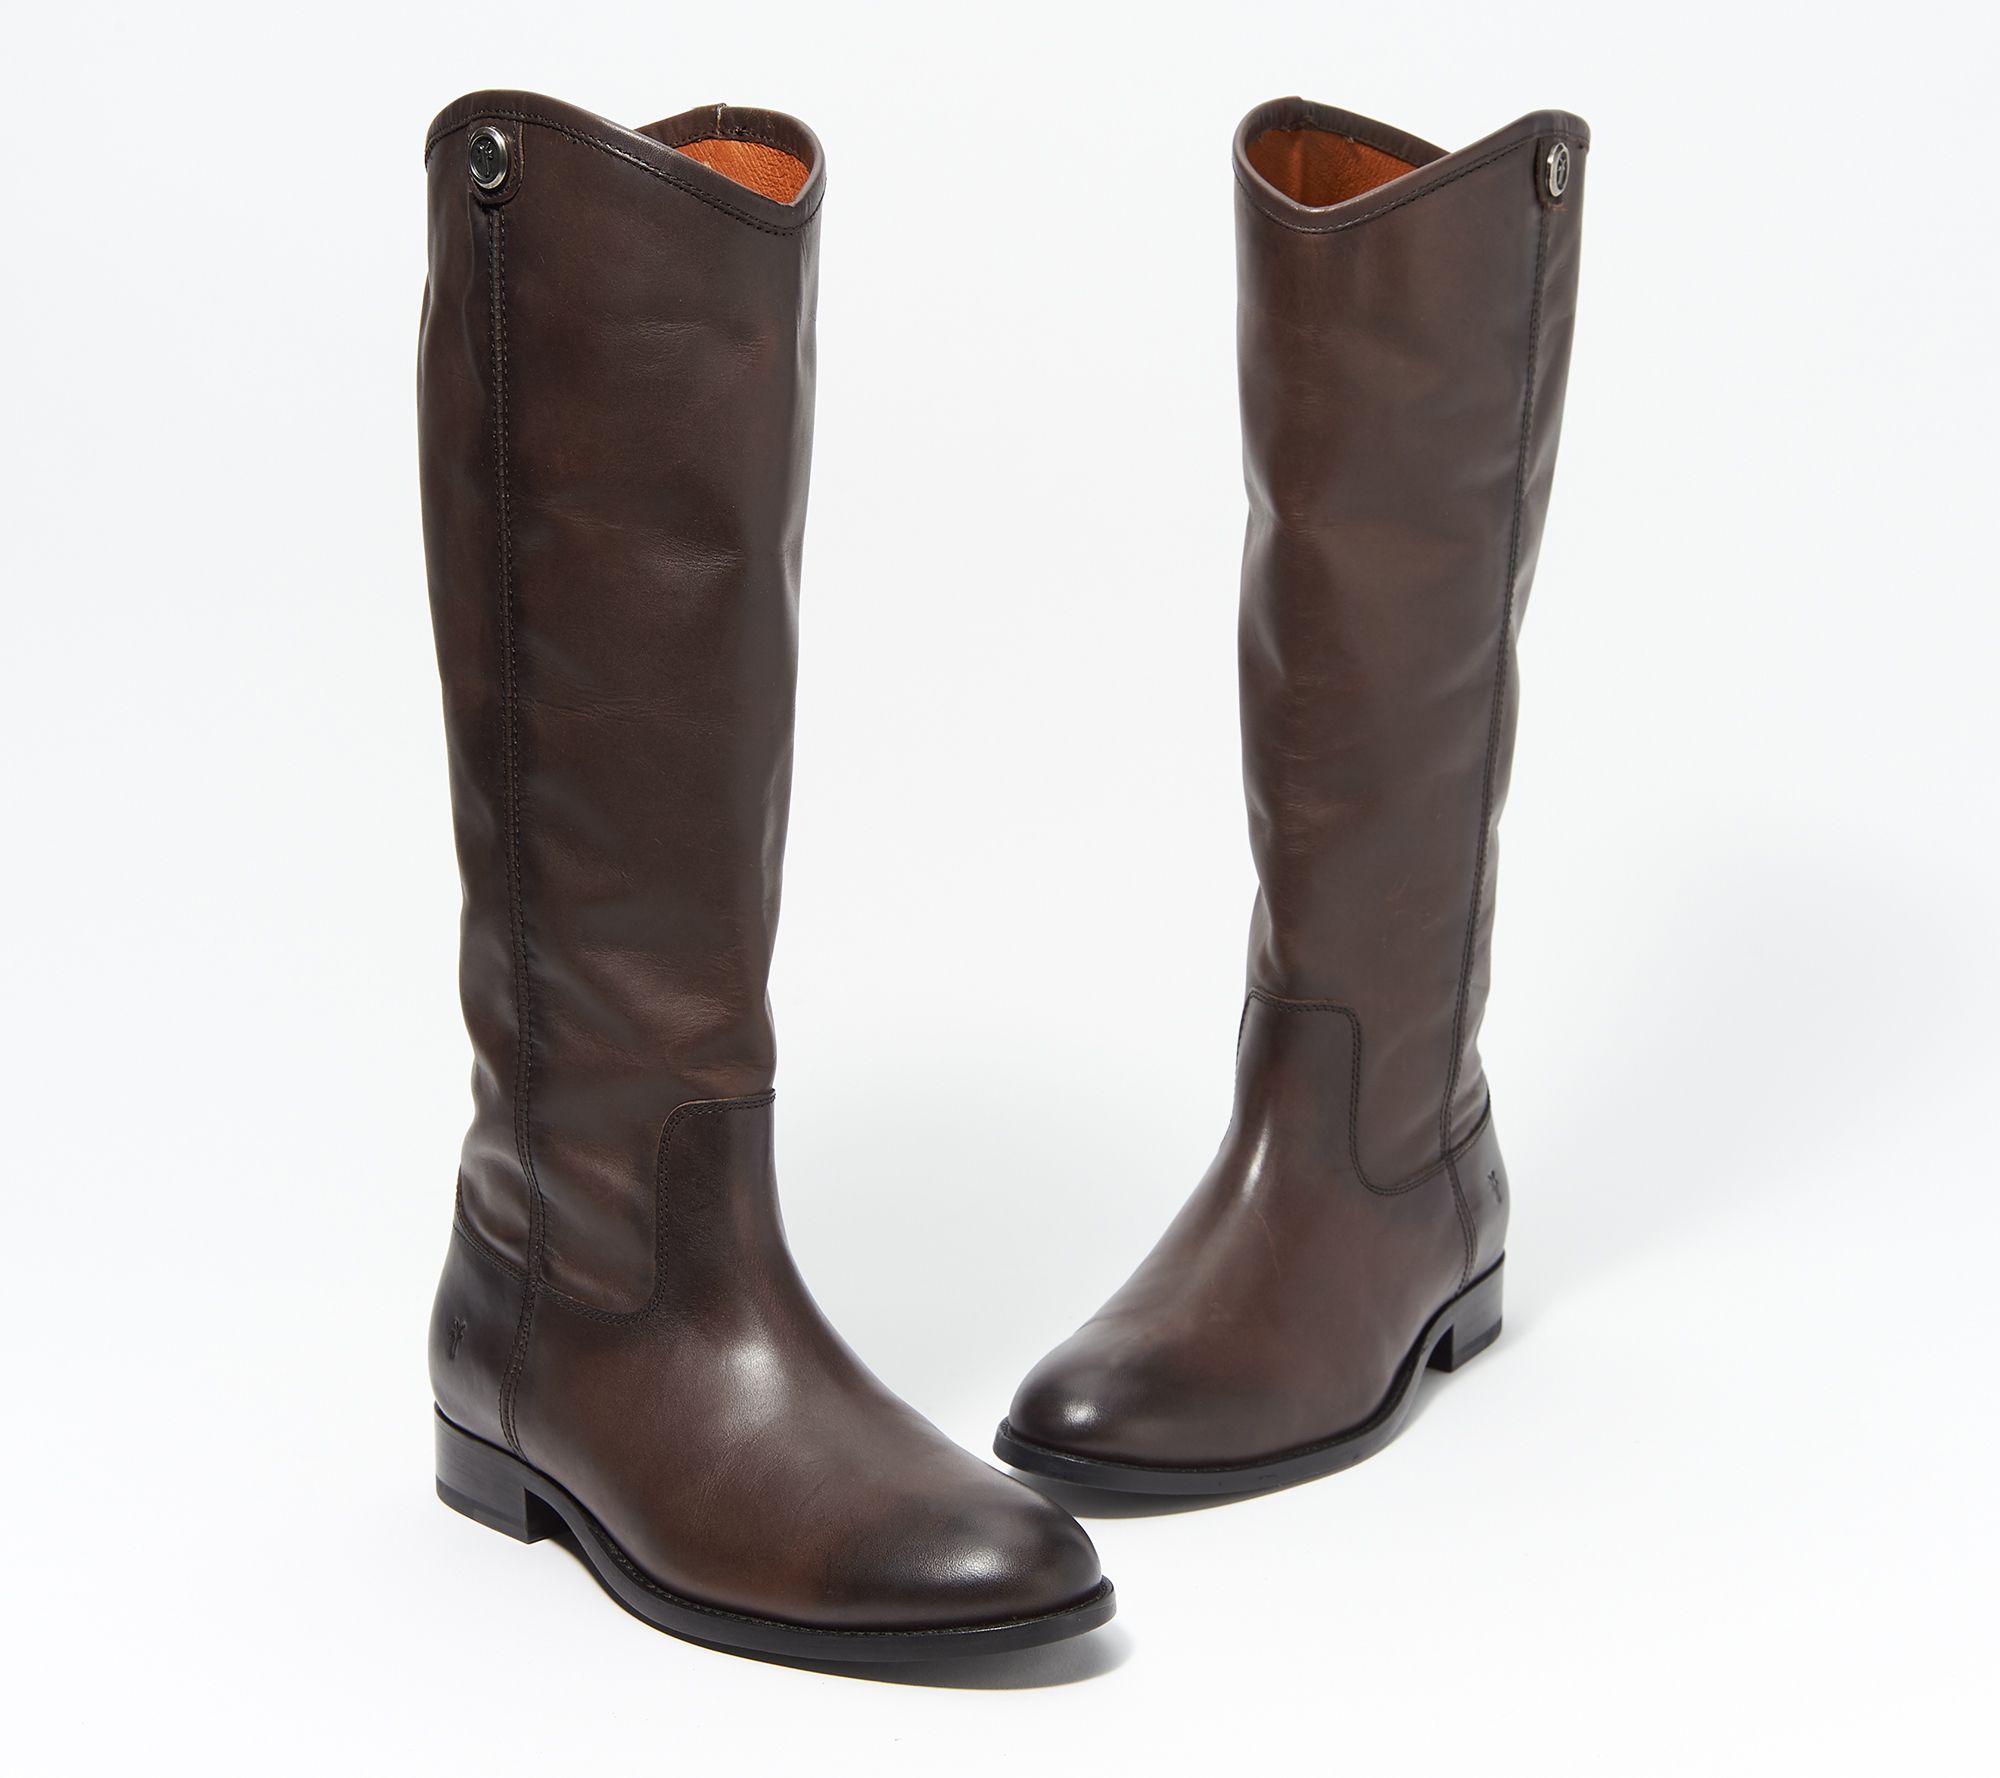 Frye Leather Tall Shaft Boots Melissa Button2 - QVC.com